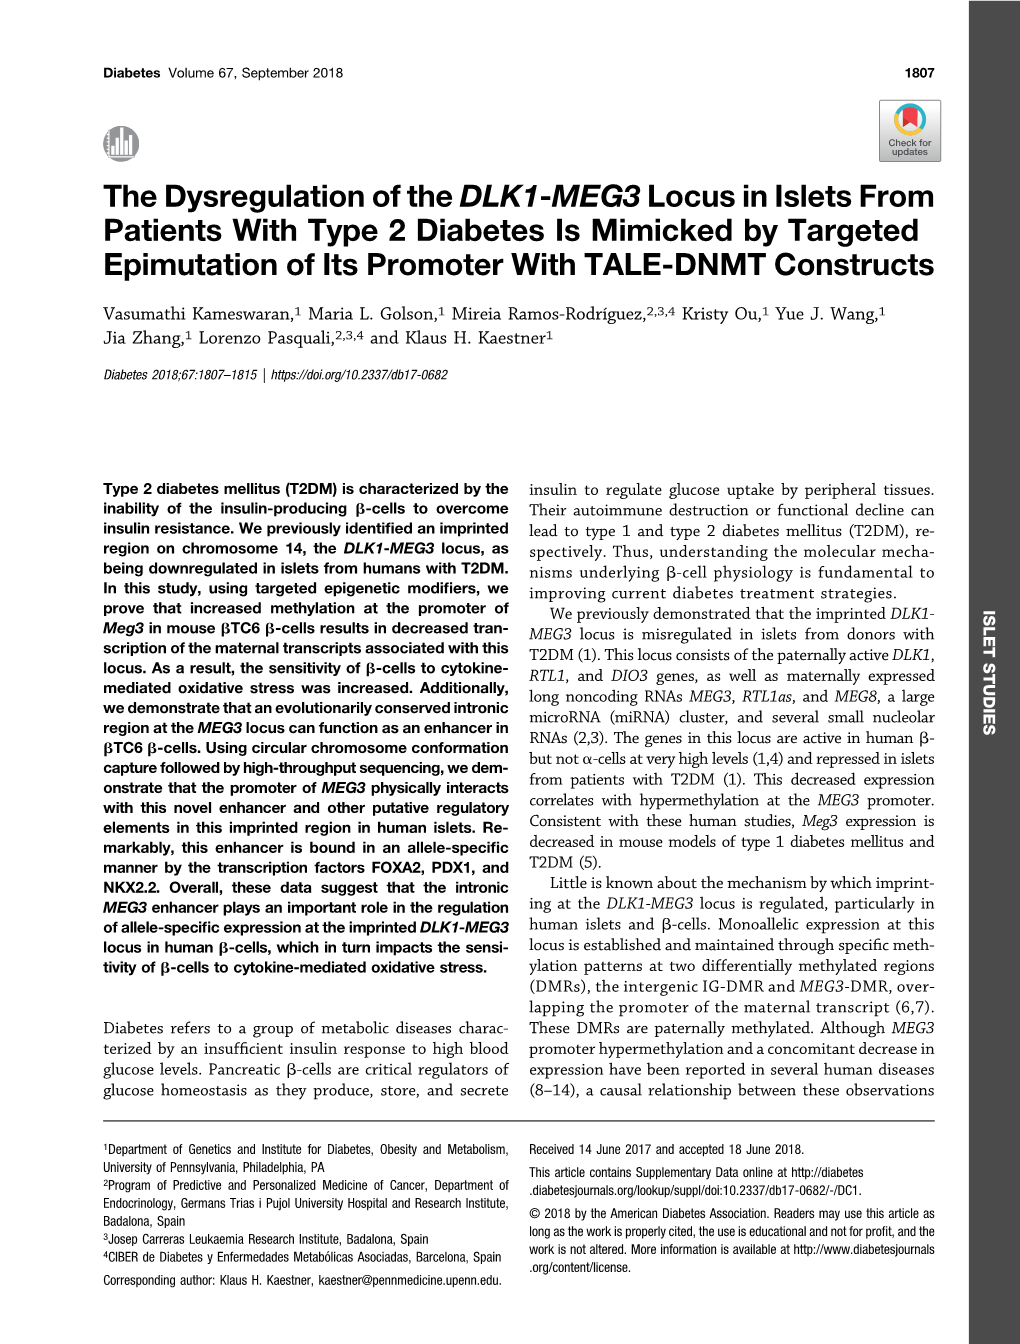 The Dysregulation of the DLK1-MEG3 Locus in Islets from Patients with Type 2 Diabetes Is Mimicked by Targeted Epimutation of Its Promoter with TALE-DNMT Constructs